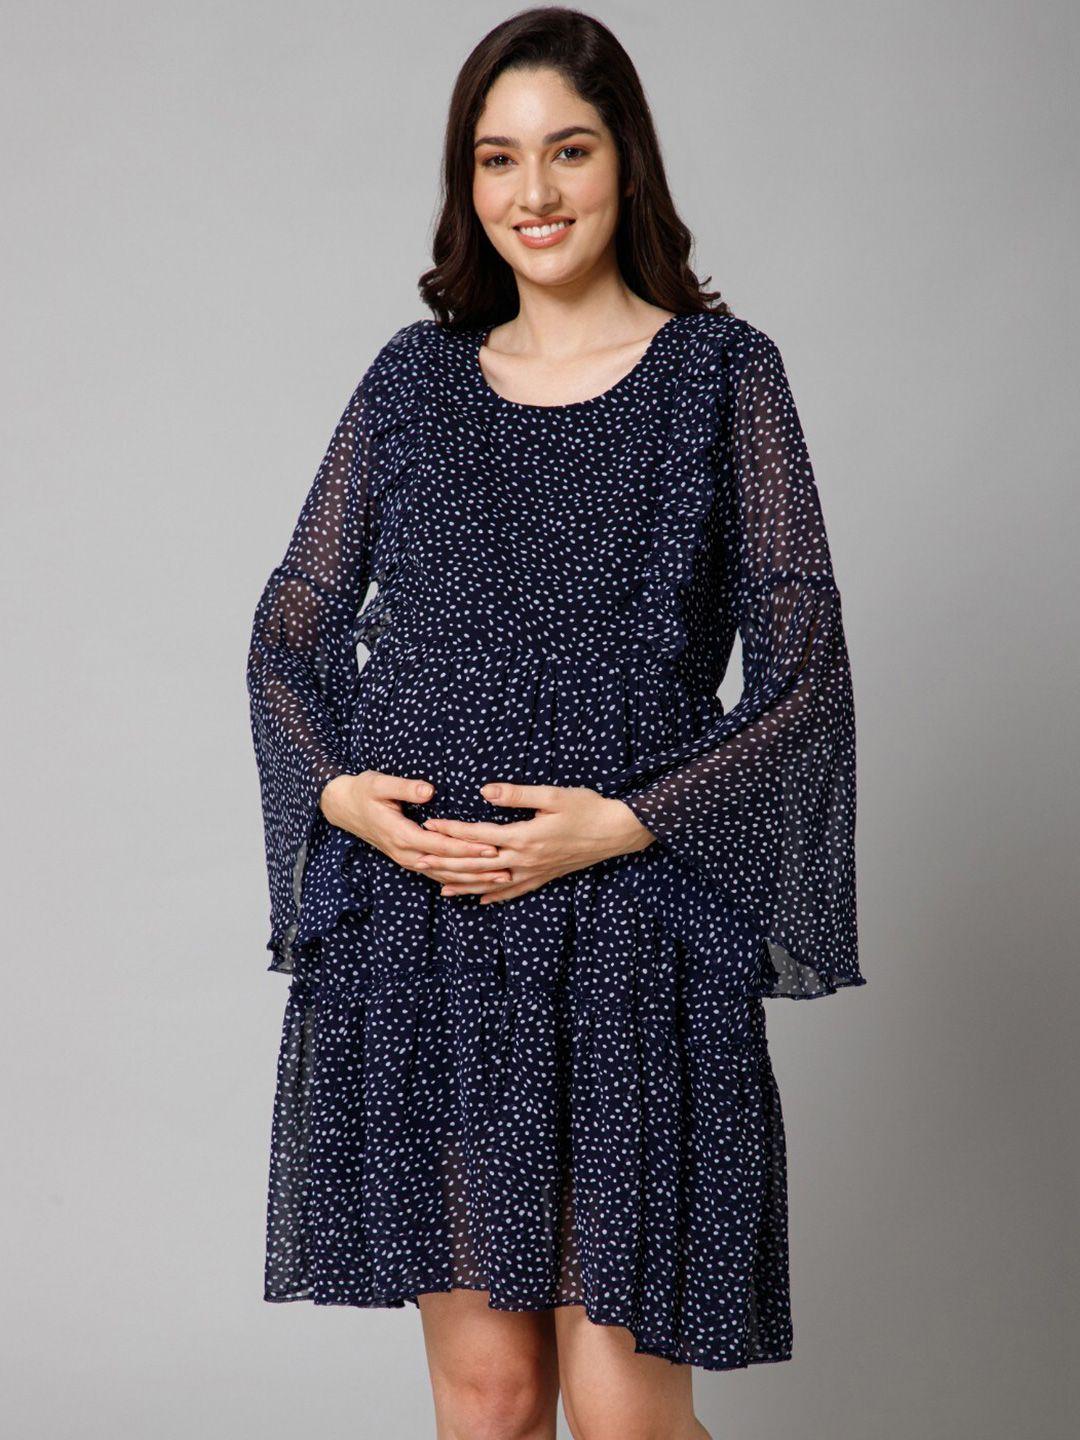 house of zelena geometric printed bell sleeves maternity fit & flare dress